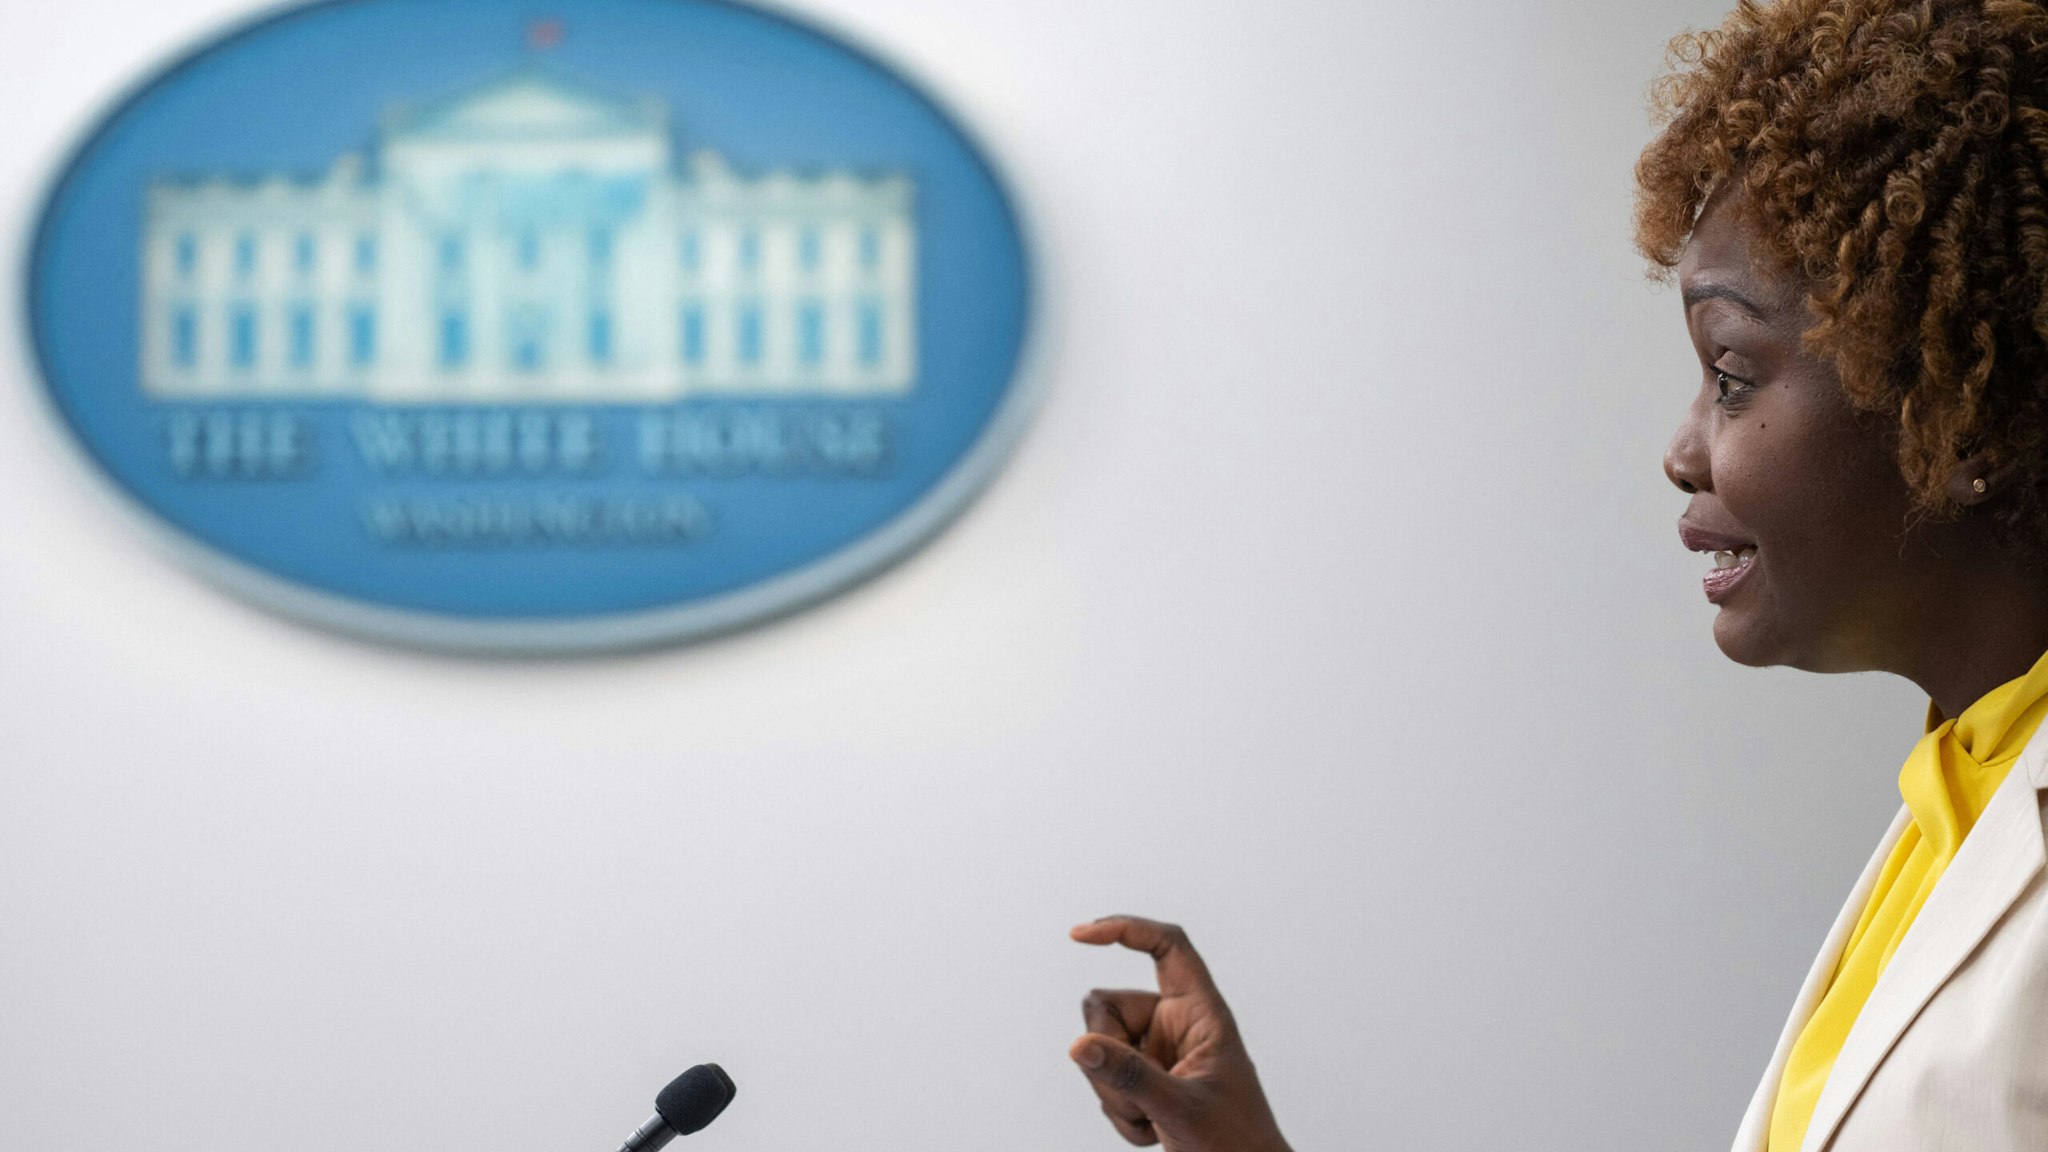 White House Press Secretary Karine Jean-Pierre speaks during the daily press briefing in the James S Brady Press Briefing Room of the White House in Washington, DC, on October 4, 2022.